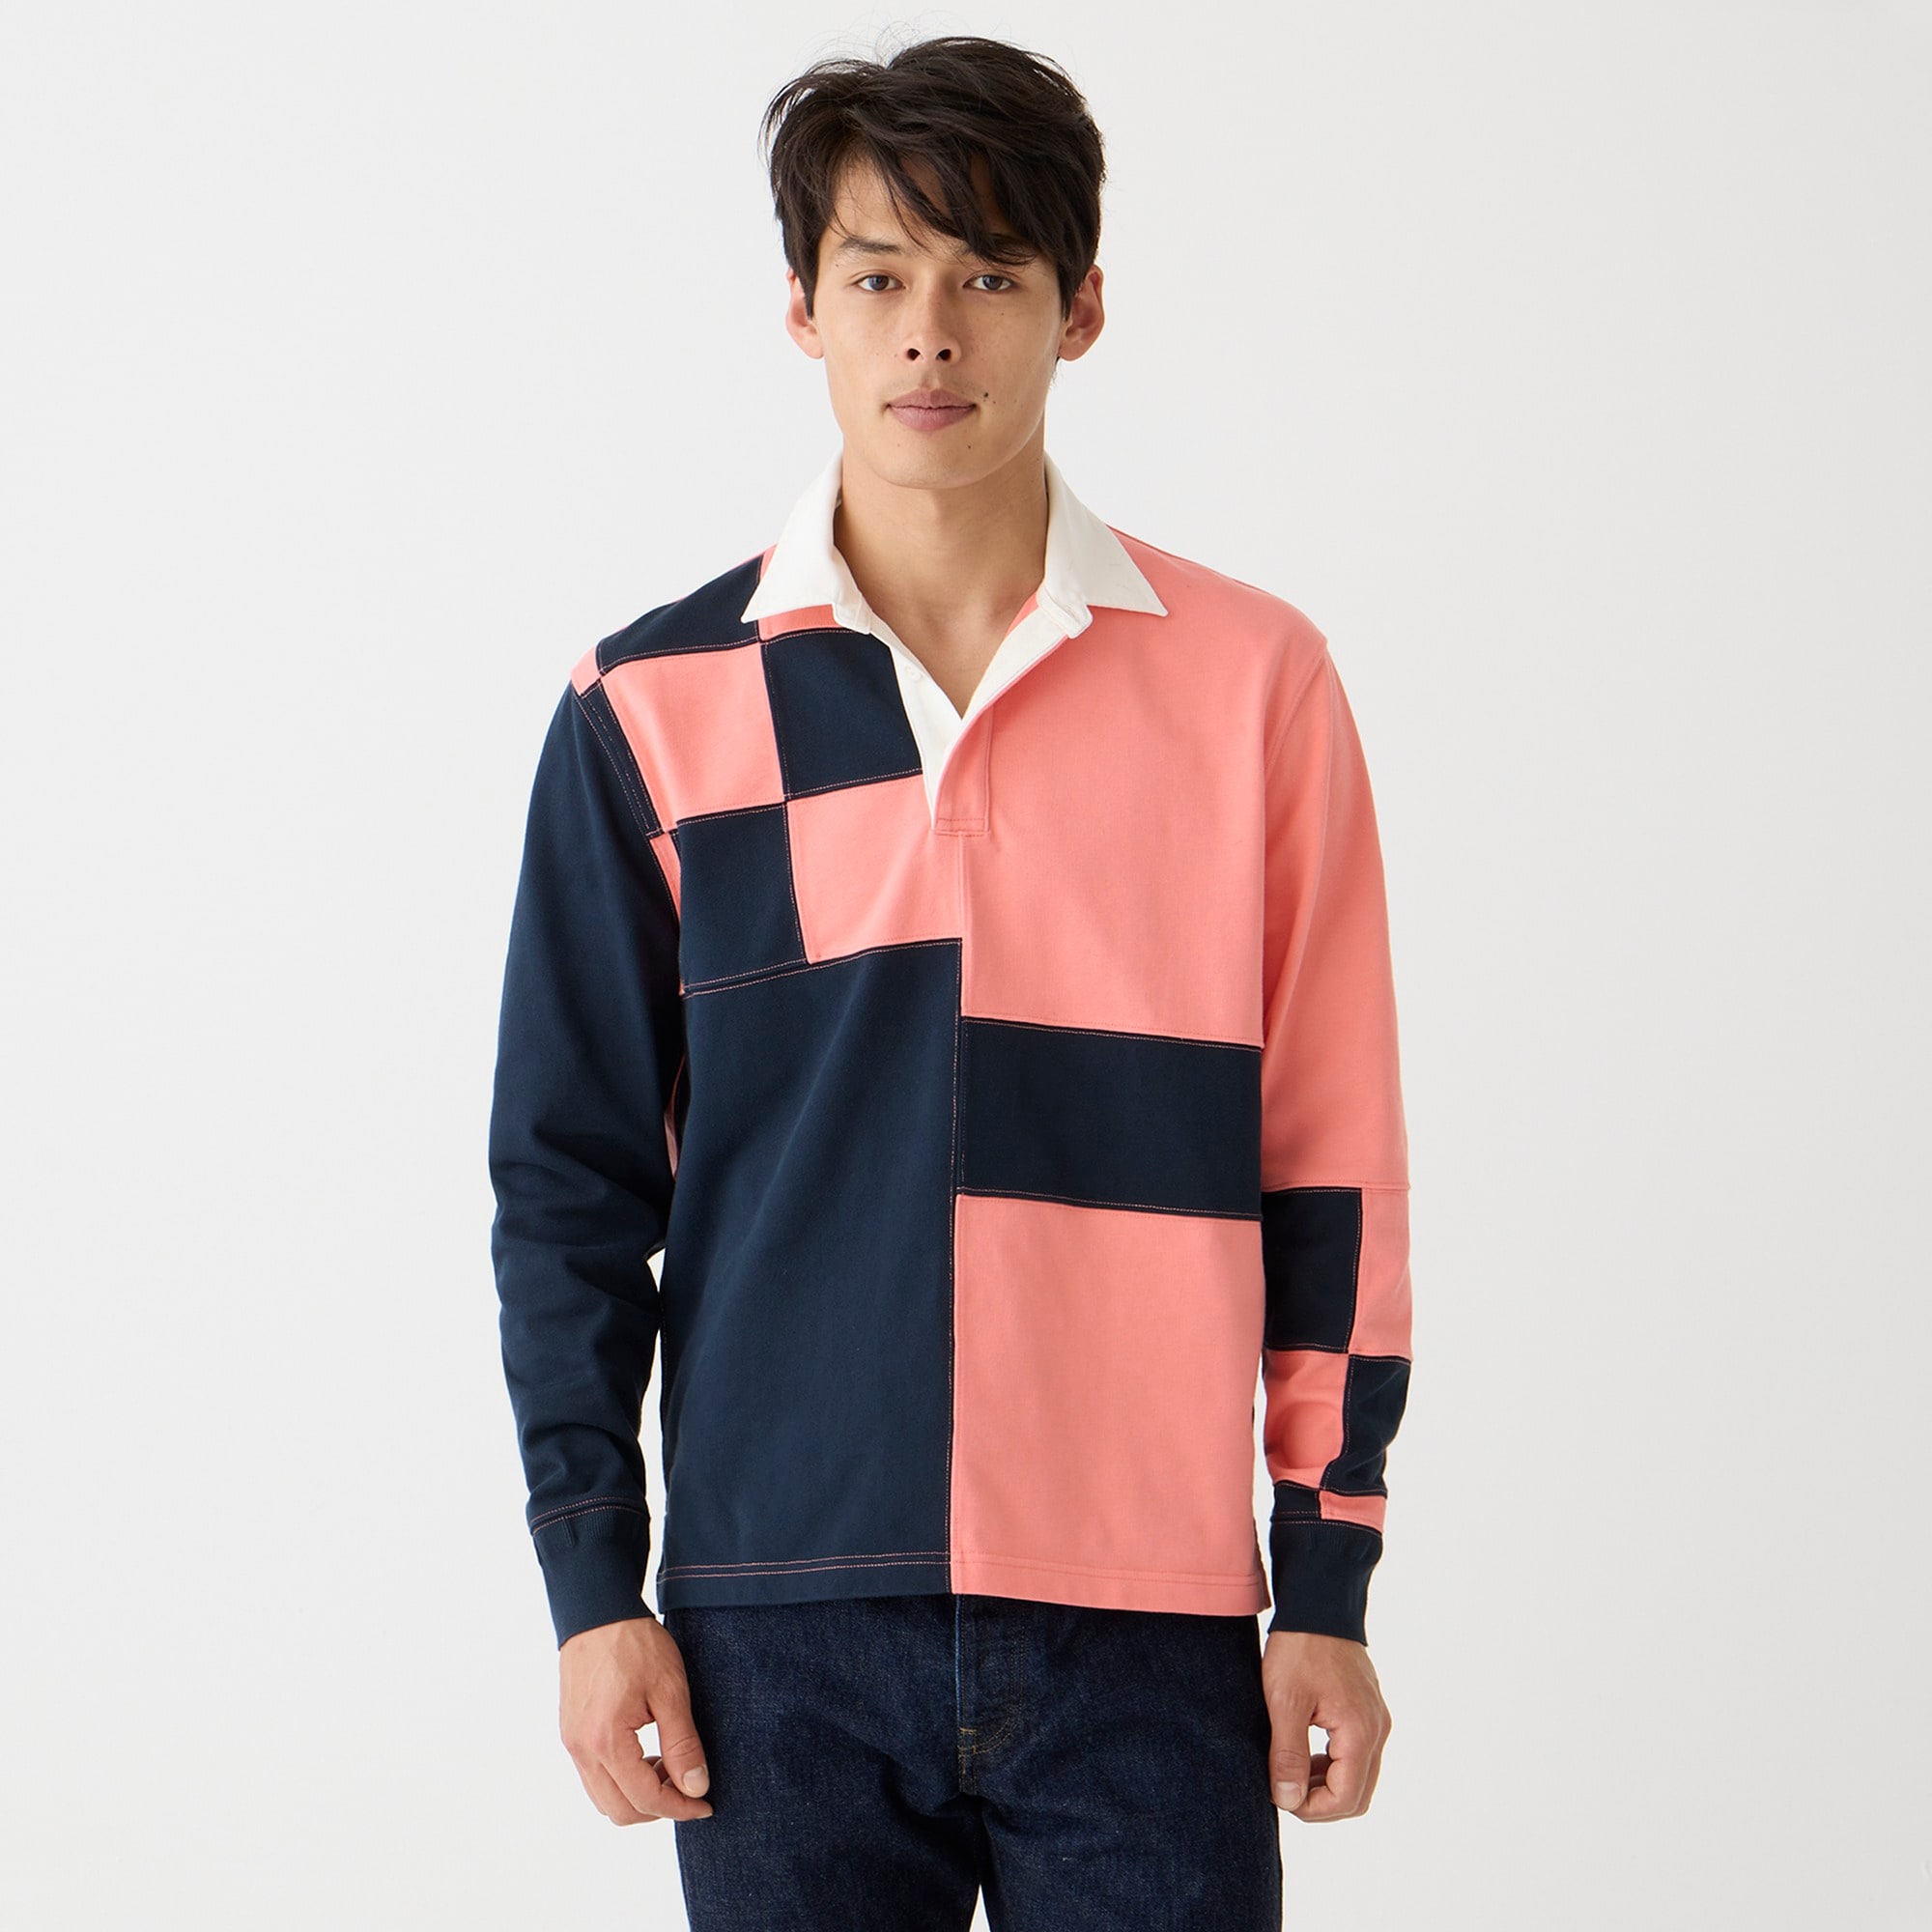 mens Limited-edition Union LA X J.Crew pieced rugby shirt